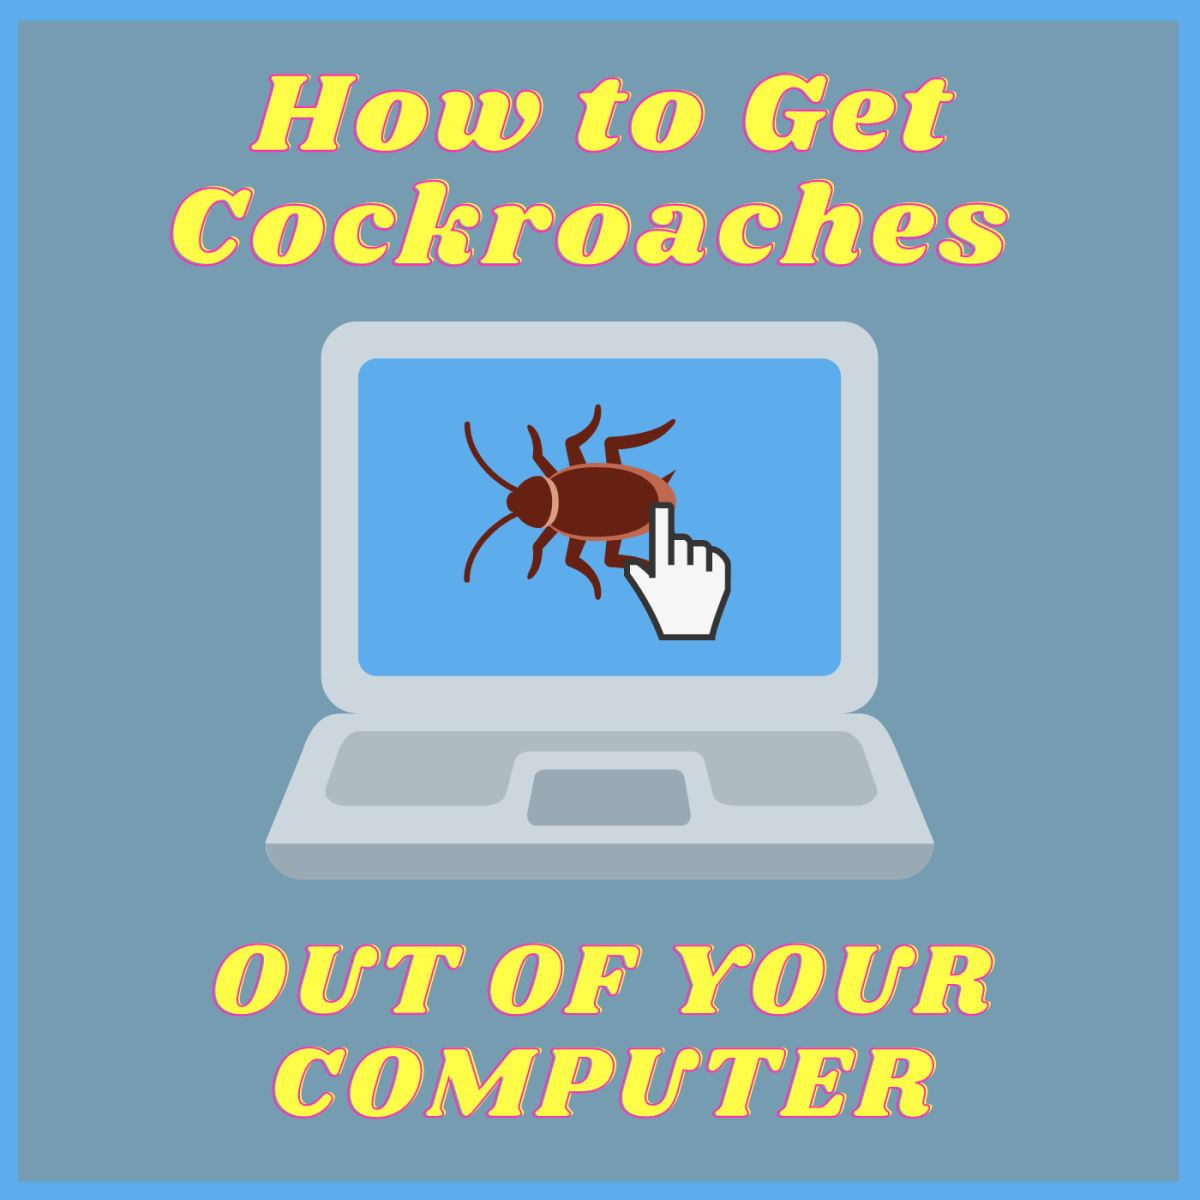 How to Remove Insects From Your Computer